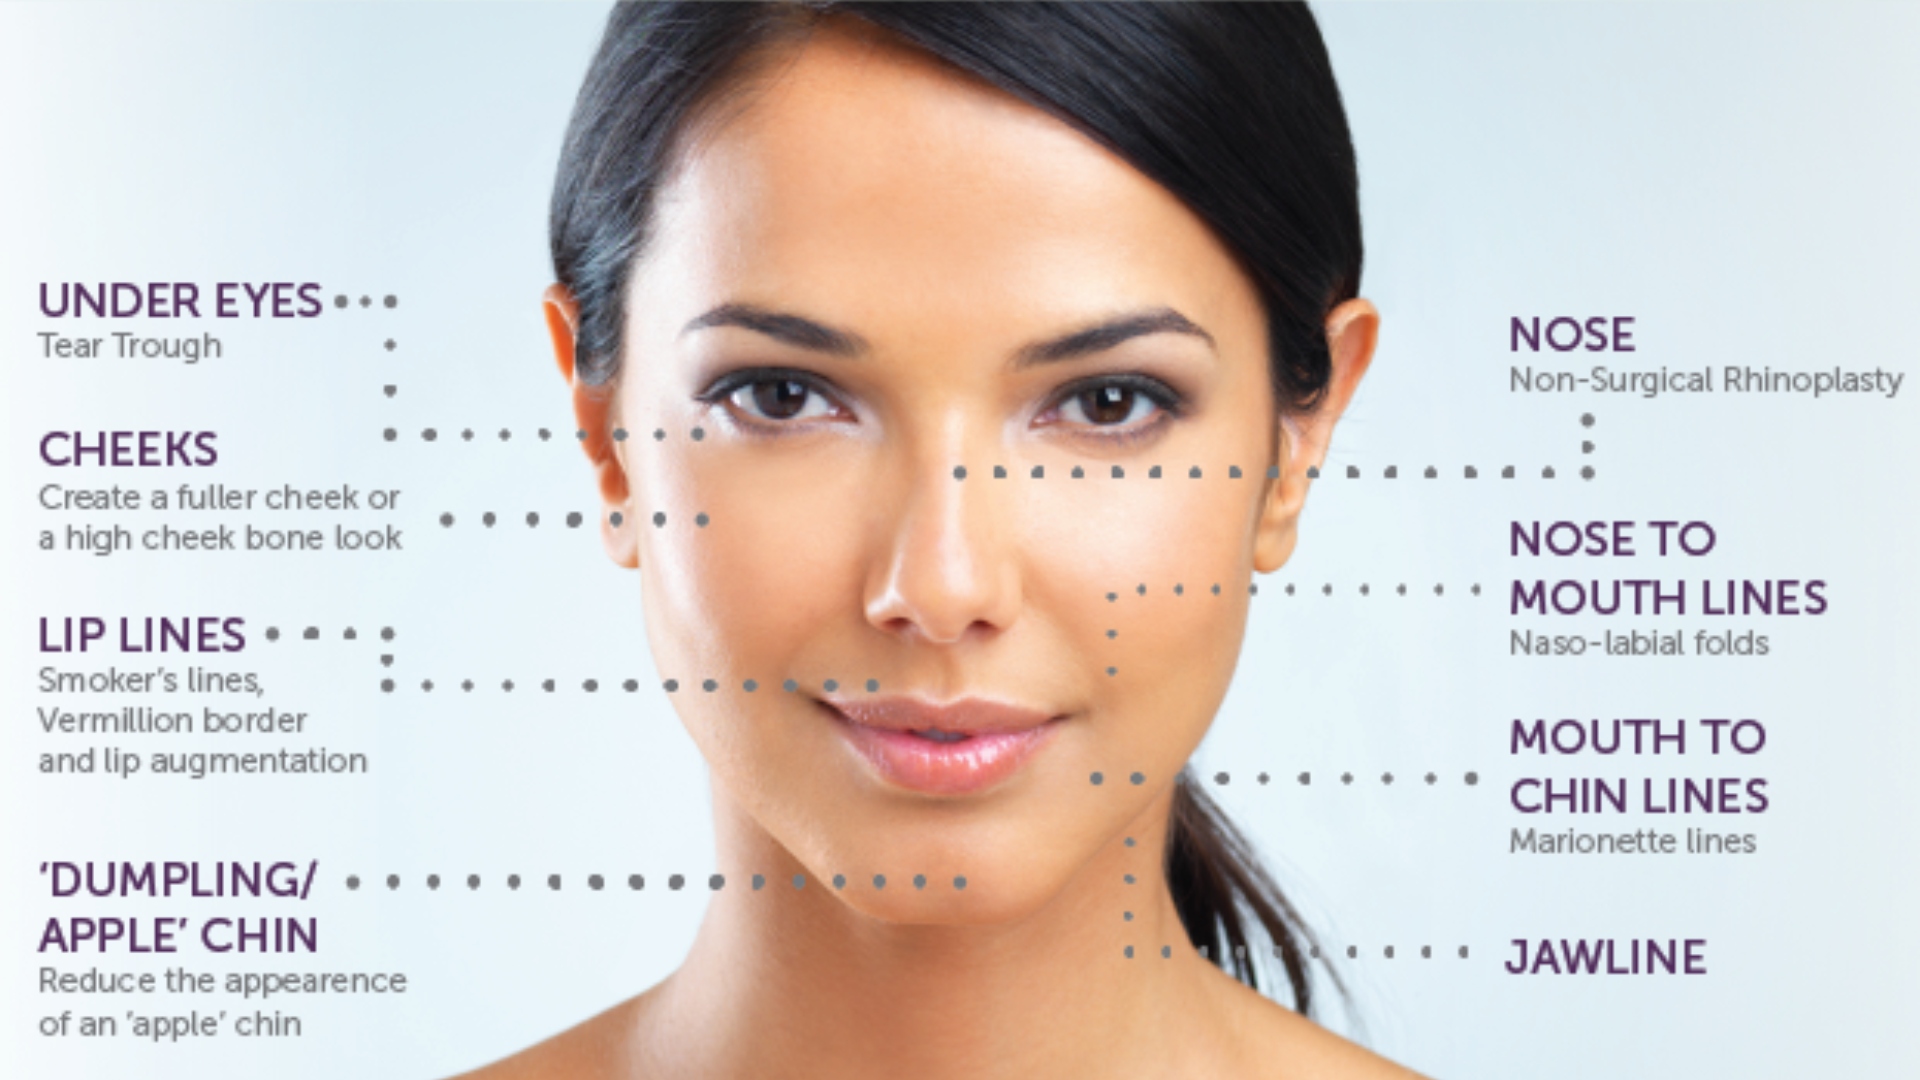 Facial Fillers Treatment Areas on Young Women's Face | Kor Medspa in Wyomissing, PA